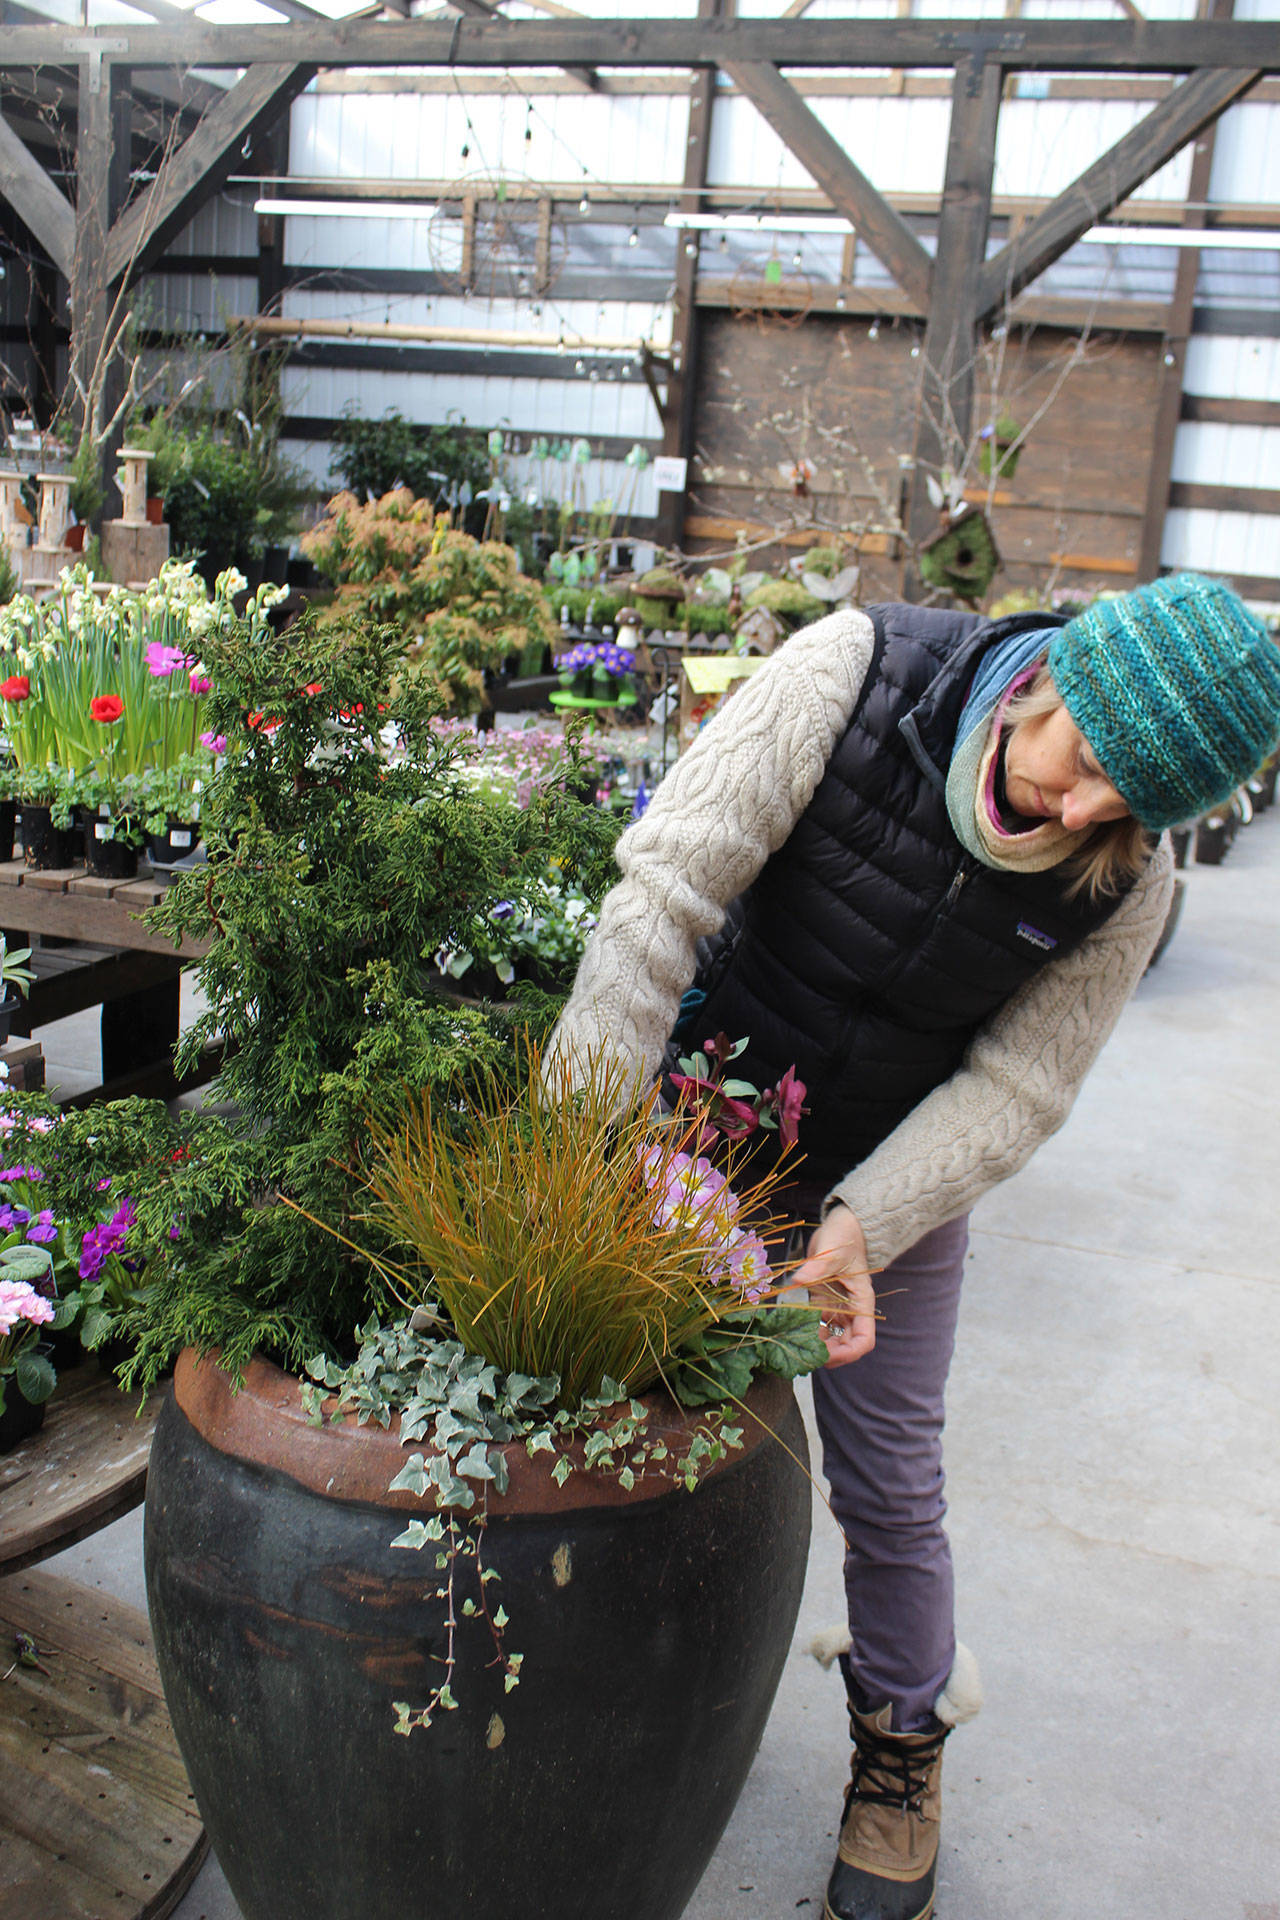 Tobey Nelson arranges a variety of plants and flowers into a large pot at Venture Out, a nursery in Clinton. Nelson, a horticulturist, is teaching the class “Pots with Pizzazz” at the March 3 Whidbey Gardening Workshop. Photo by Patricia Guthrie/Whidbey News-Times